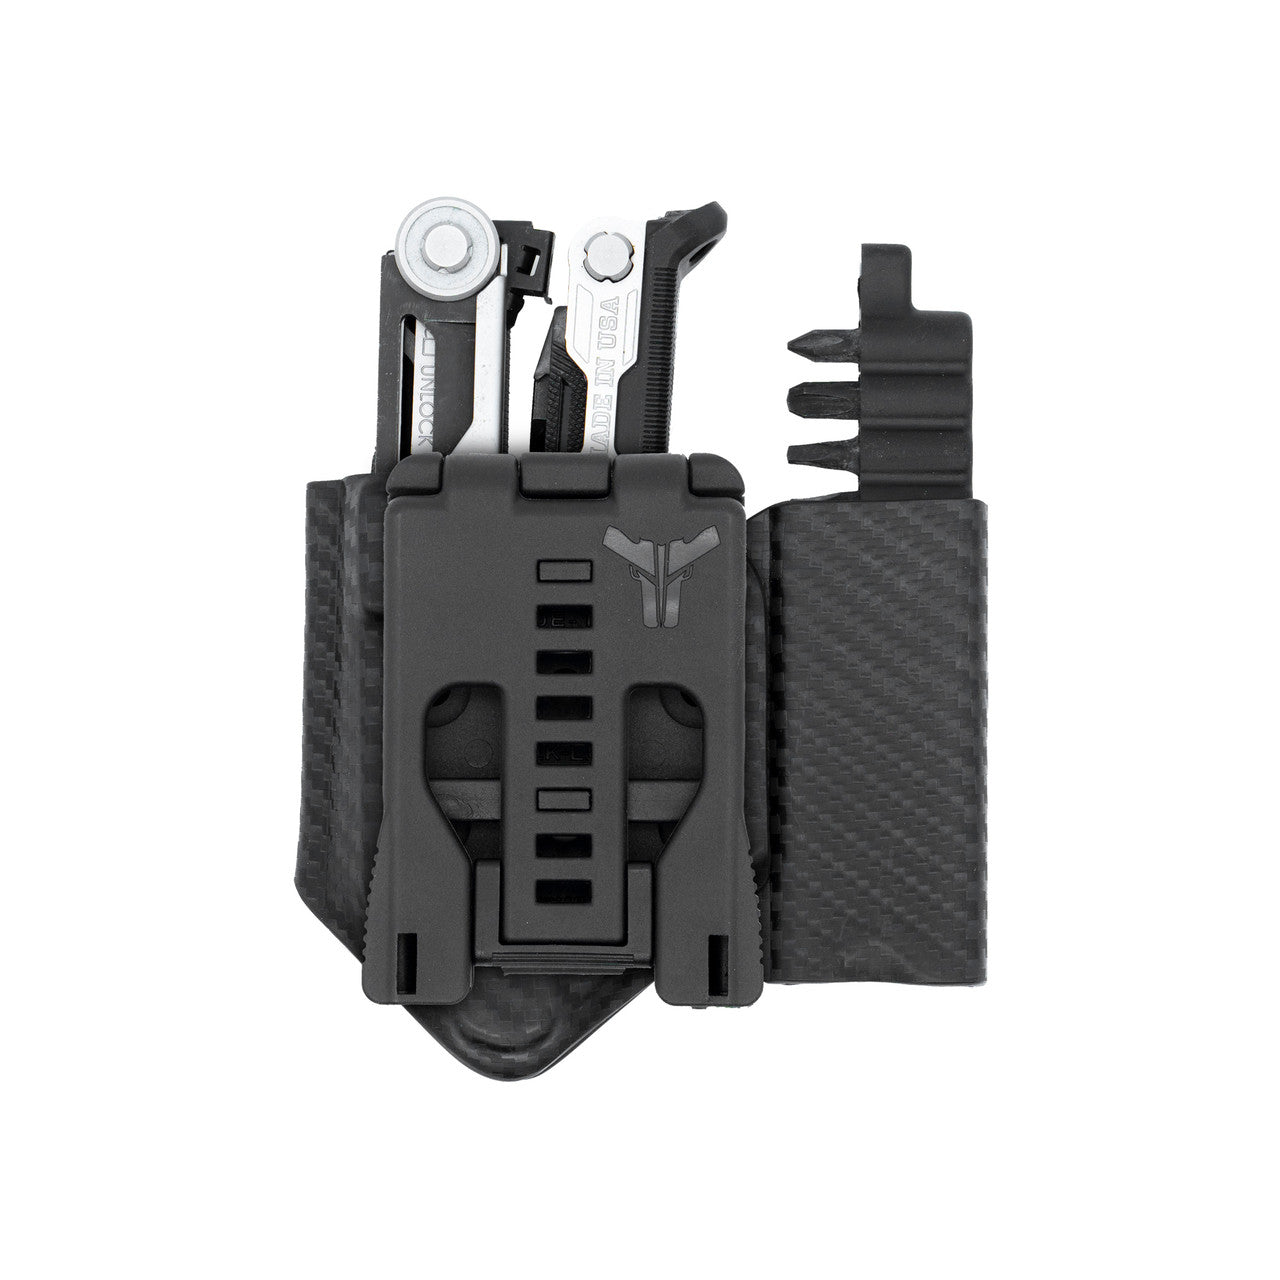 USA Made Kydex Sheath for the Gerber Center Drive with Bit Kit